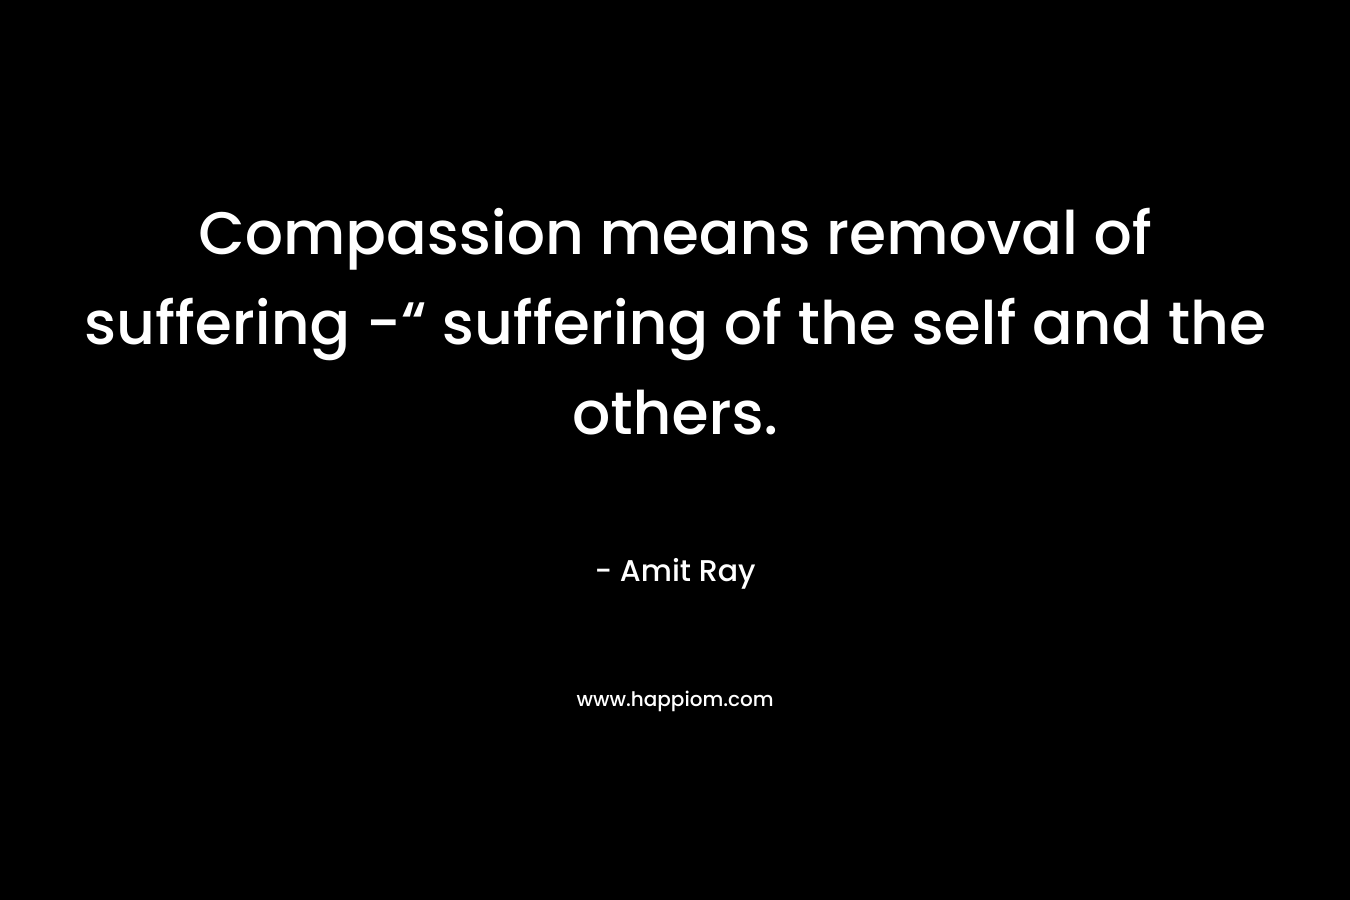 Compassion means removal of suffering -“ suffering of the self and the others.